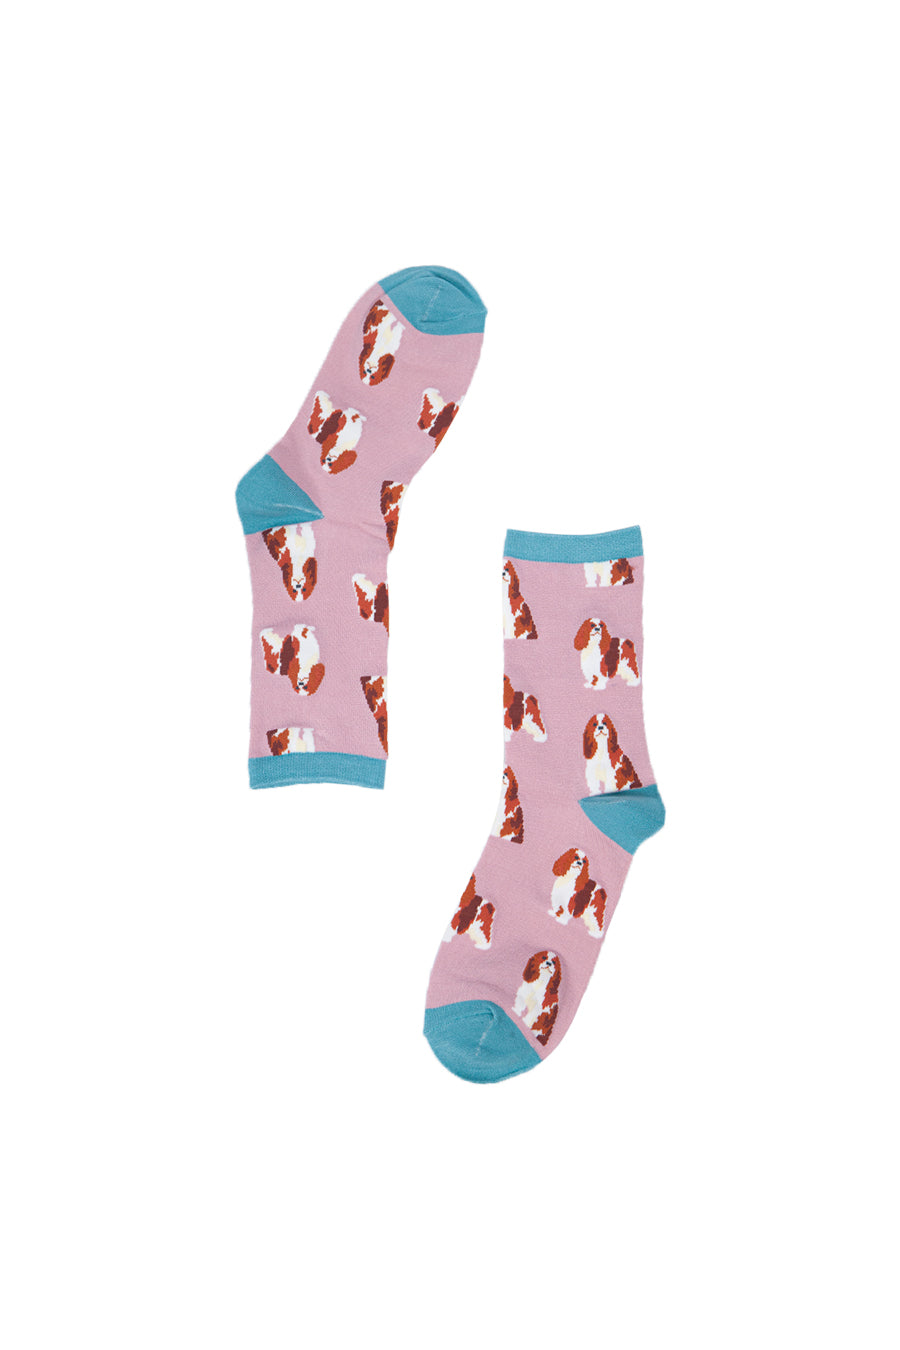 pink and blue socks with an all over print of king charles spaniel dogs